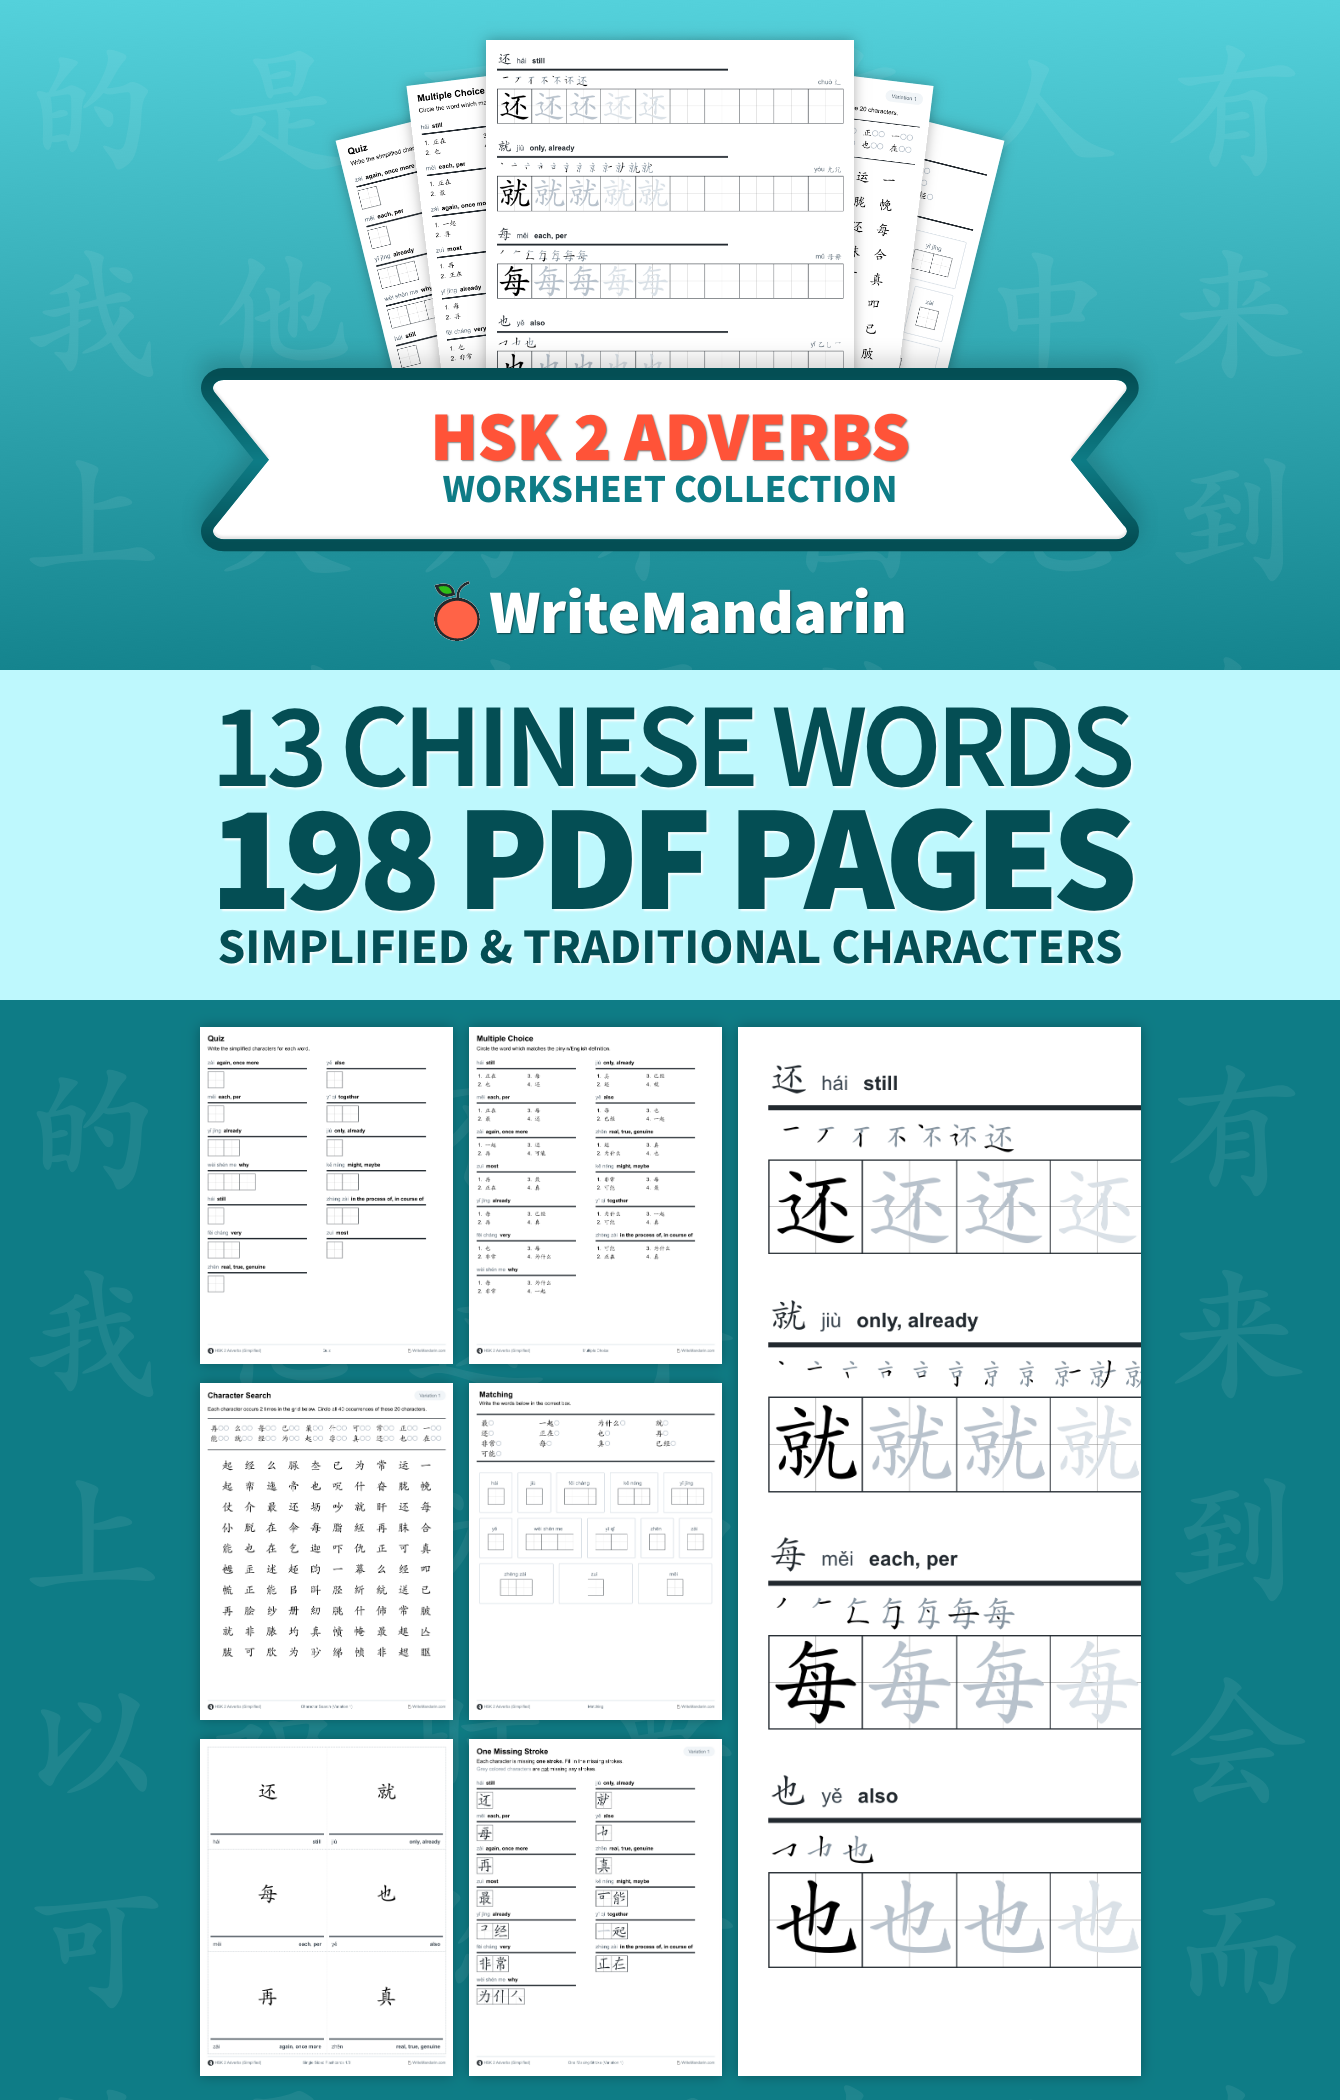 Preview image of HSK 2 Adverbs worksheet collection